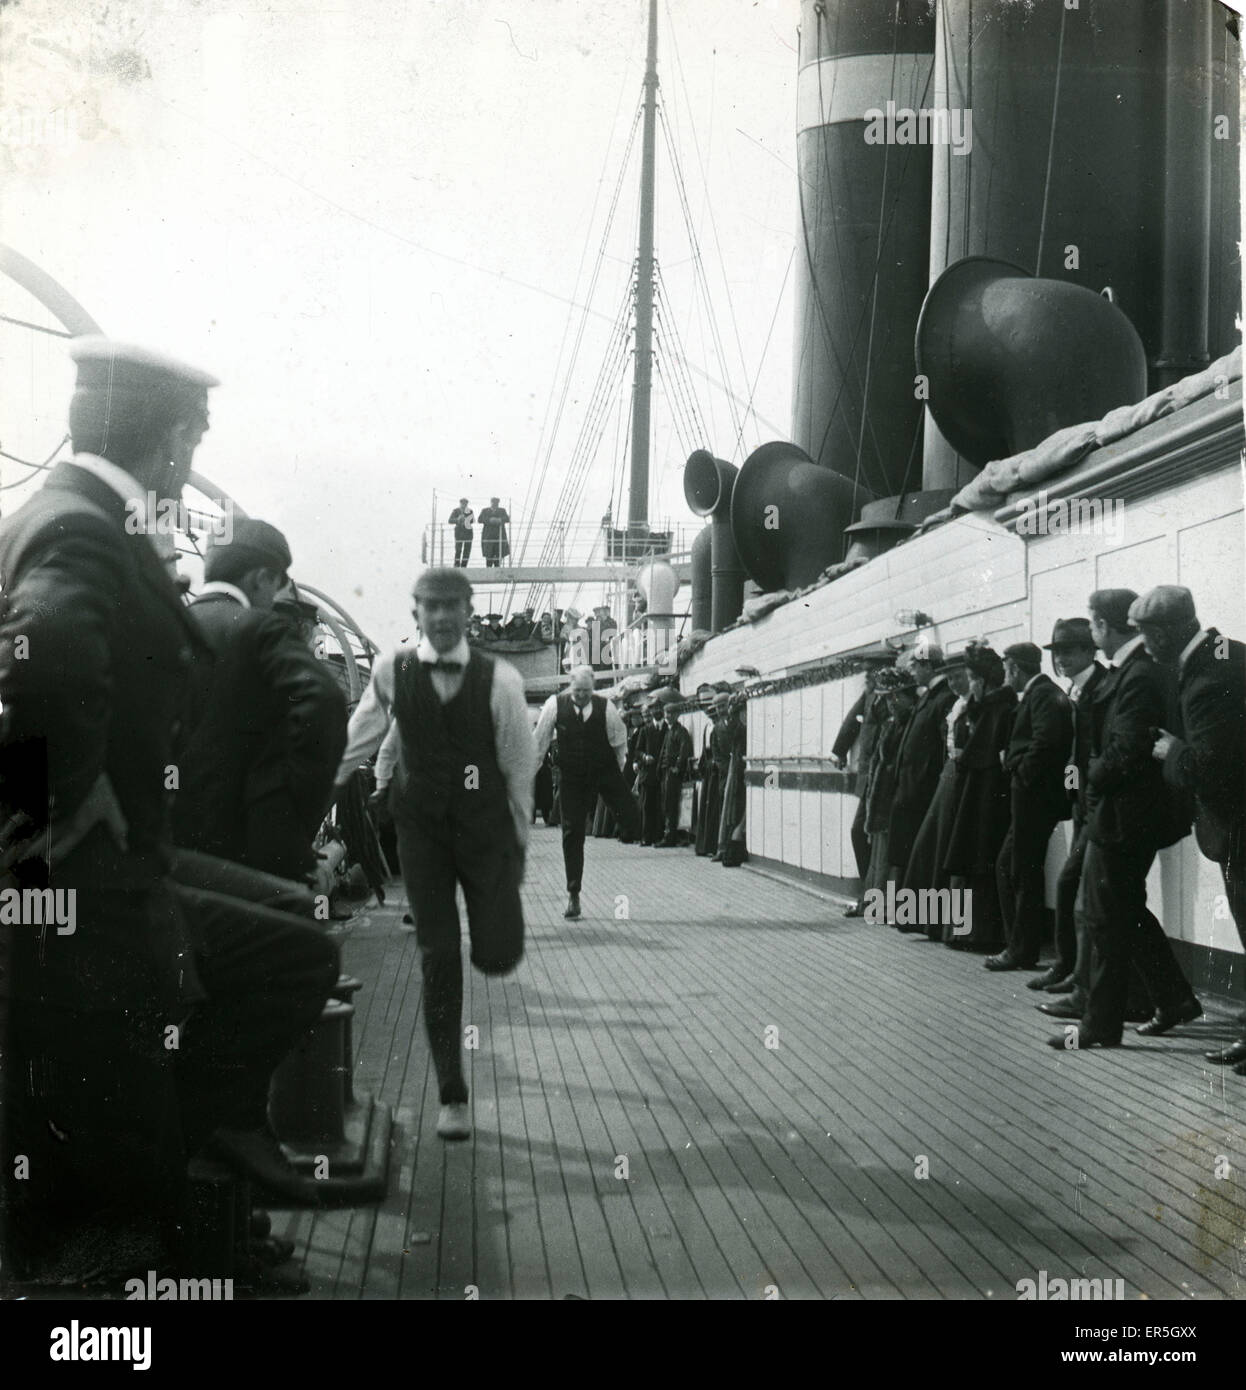 Victorians Racing on Deck of Ship Stock Photo